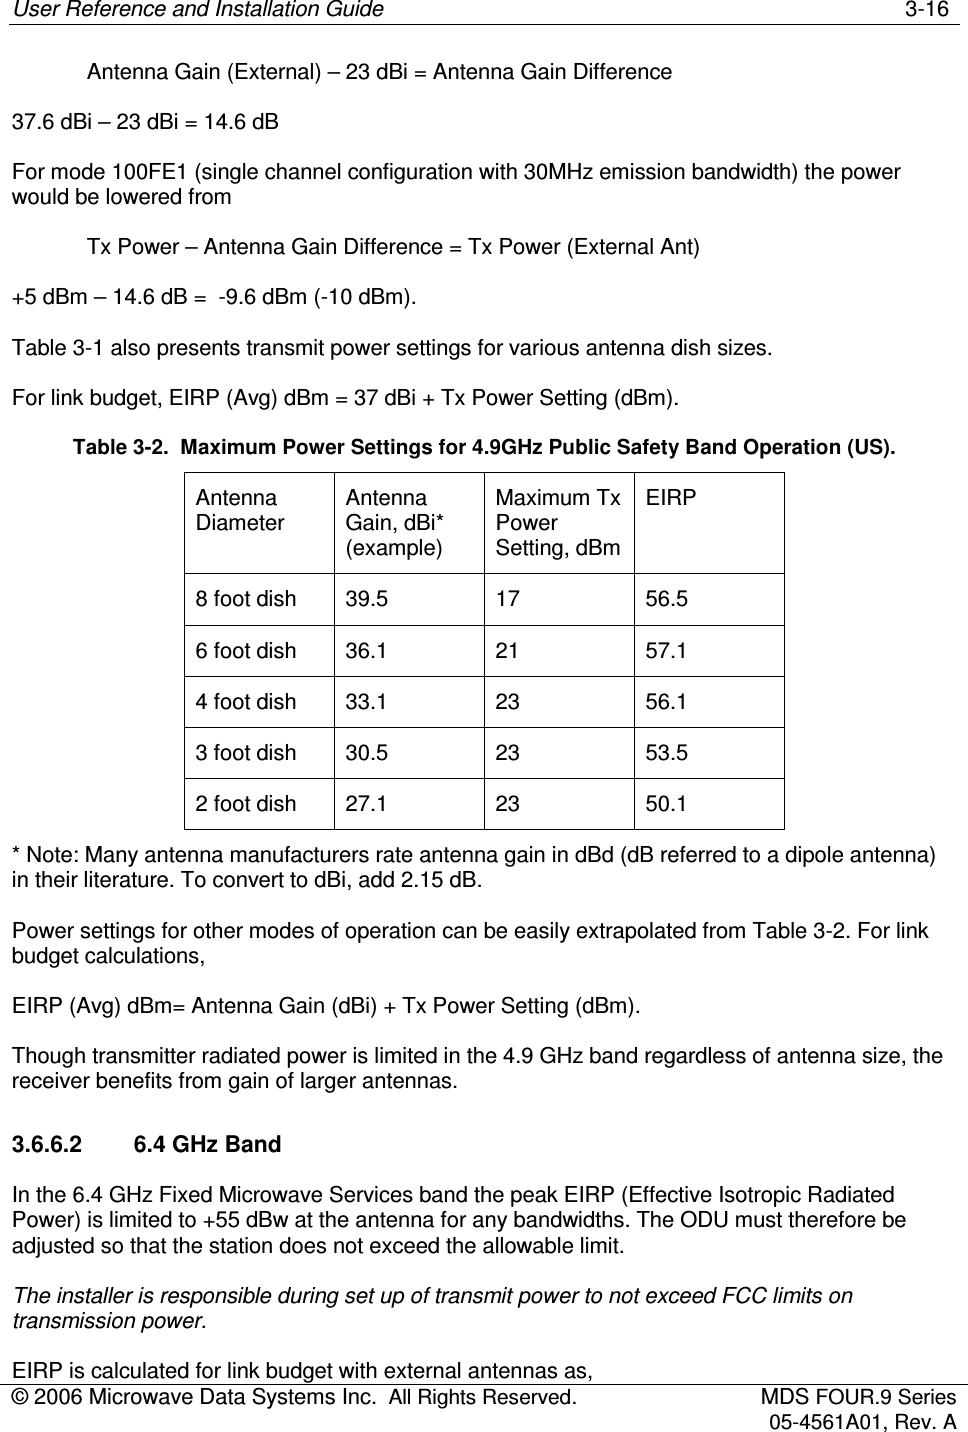 User Reference and Installation Guide    3-16 © 2006 Microwave Data Systems Inc.  All Rights Reserved.  MDS FOUR.9 Series 05-4561A01, Rev. A    Antenna Gain (External) – 23 dBi = Antenna Gain Difference 37.6 dBi – 23 dBi = 14.6 dB For mode 100FE1 (single channel configuration with 30MHz emission bandwidth) the power would be lowered from    Tx Power – Antenna Gain Difference = Tx Power (External Ant) +5 dBm – 14.6 dB =  -9.6 dBm (-10 dBm).  Table 3-1 also presents transmit power settings for various antenna dish sizes. For link budget, EIRP (Avg) dBm = 37 dBi + Tx Power Setting (dBm). Table 3-2.  Maximum Power Settings for 4.9GHz Public Safety Band Operation (US). Antenna Diameter Antenna Gain, dBi* (example) Maximum Tx Power Setting, dBm EIRP 8 foot dish  39.5  17  56.5 6 foot dish  36.1  21  57.1 4 foot dish  33.1  23  56.1 3 foot dish  30.5  23  53.5 2 foot dish  27.1  23  50.1 * Note: Many antenna manufacturers rate antenna gain in dBd (dB referred to a dipole antenna) in their literature. To convert to dBi, add 2.15 dB. Power settings for other modes of operation can be easily extrapolated from Table 3-2. For link budget calculations,  EIRP (Avg) dBm= Antenna Gain (dBi) + Tx Power Setting (dBm).  Though transmitter radiated power is limited in the 4.9 GHz band regardless of antenna size, the receiver benefits from gain of larger antennas.  3.6.6.2  6.4 GHz Band In the 6.4 GHz Fixed Microwave Services band the peak EIRP (Effective Isotropic Radiated Power) is limited to +55 dBw at the antenna for any bandwidths. The ODU must therefore be adjusted so that the station does not exceed the allowable limit. The installer is responsible during set up of transmit power to not exceed FCC limits on transmission power.  EIRP is calculated for link budget with external antennas as,  